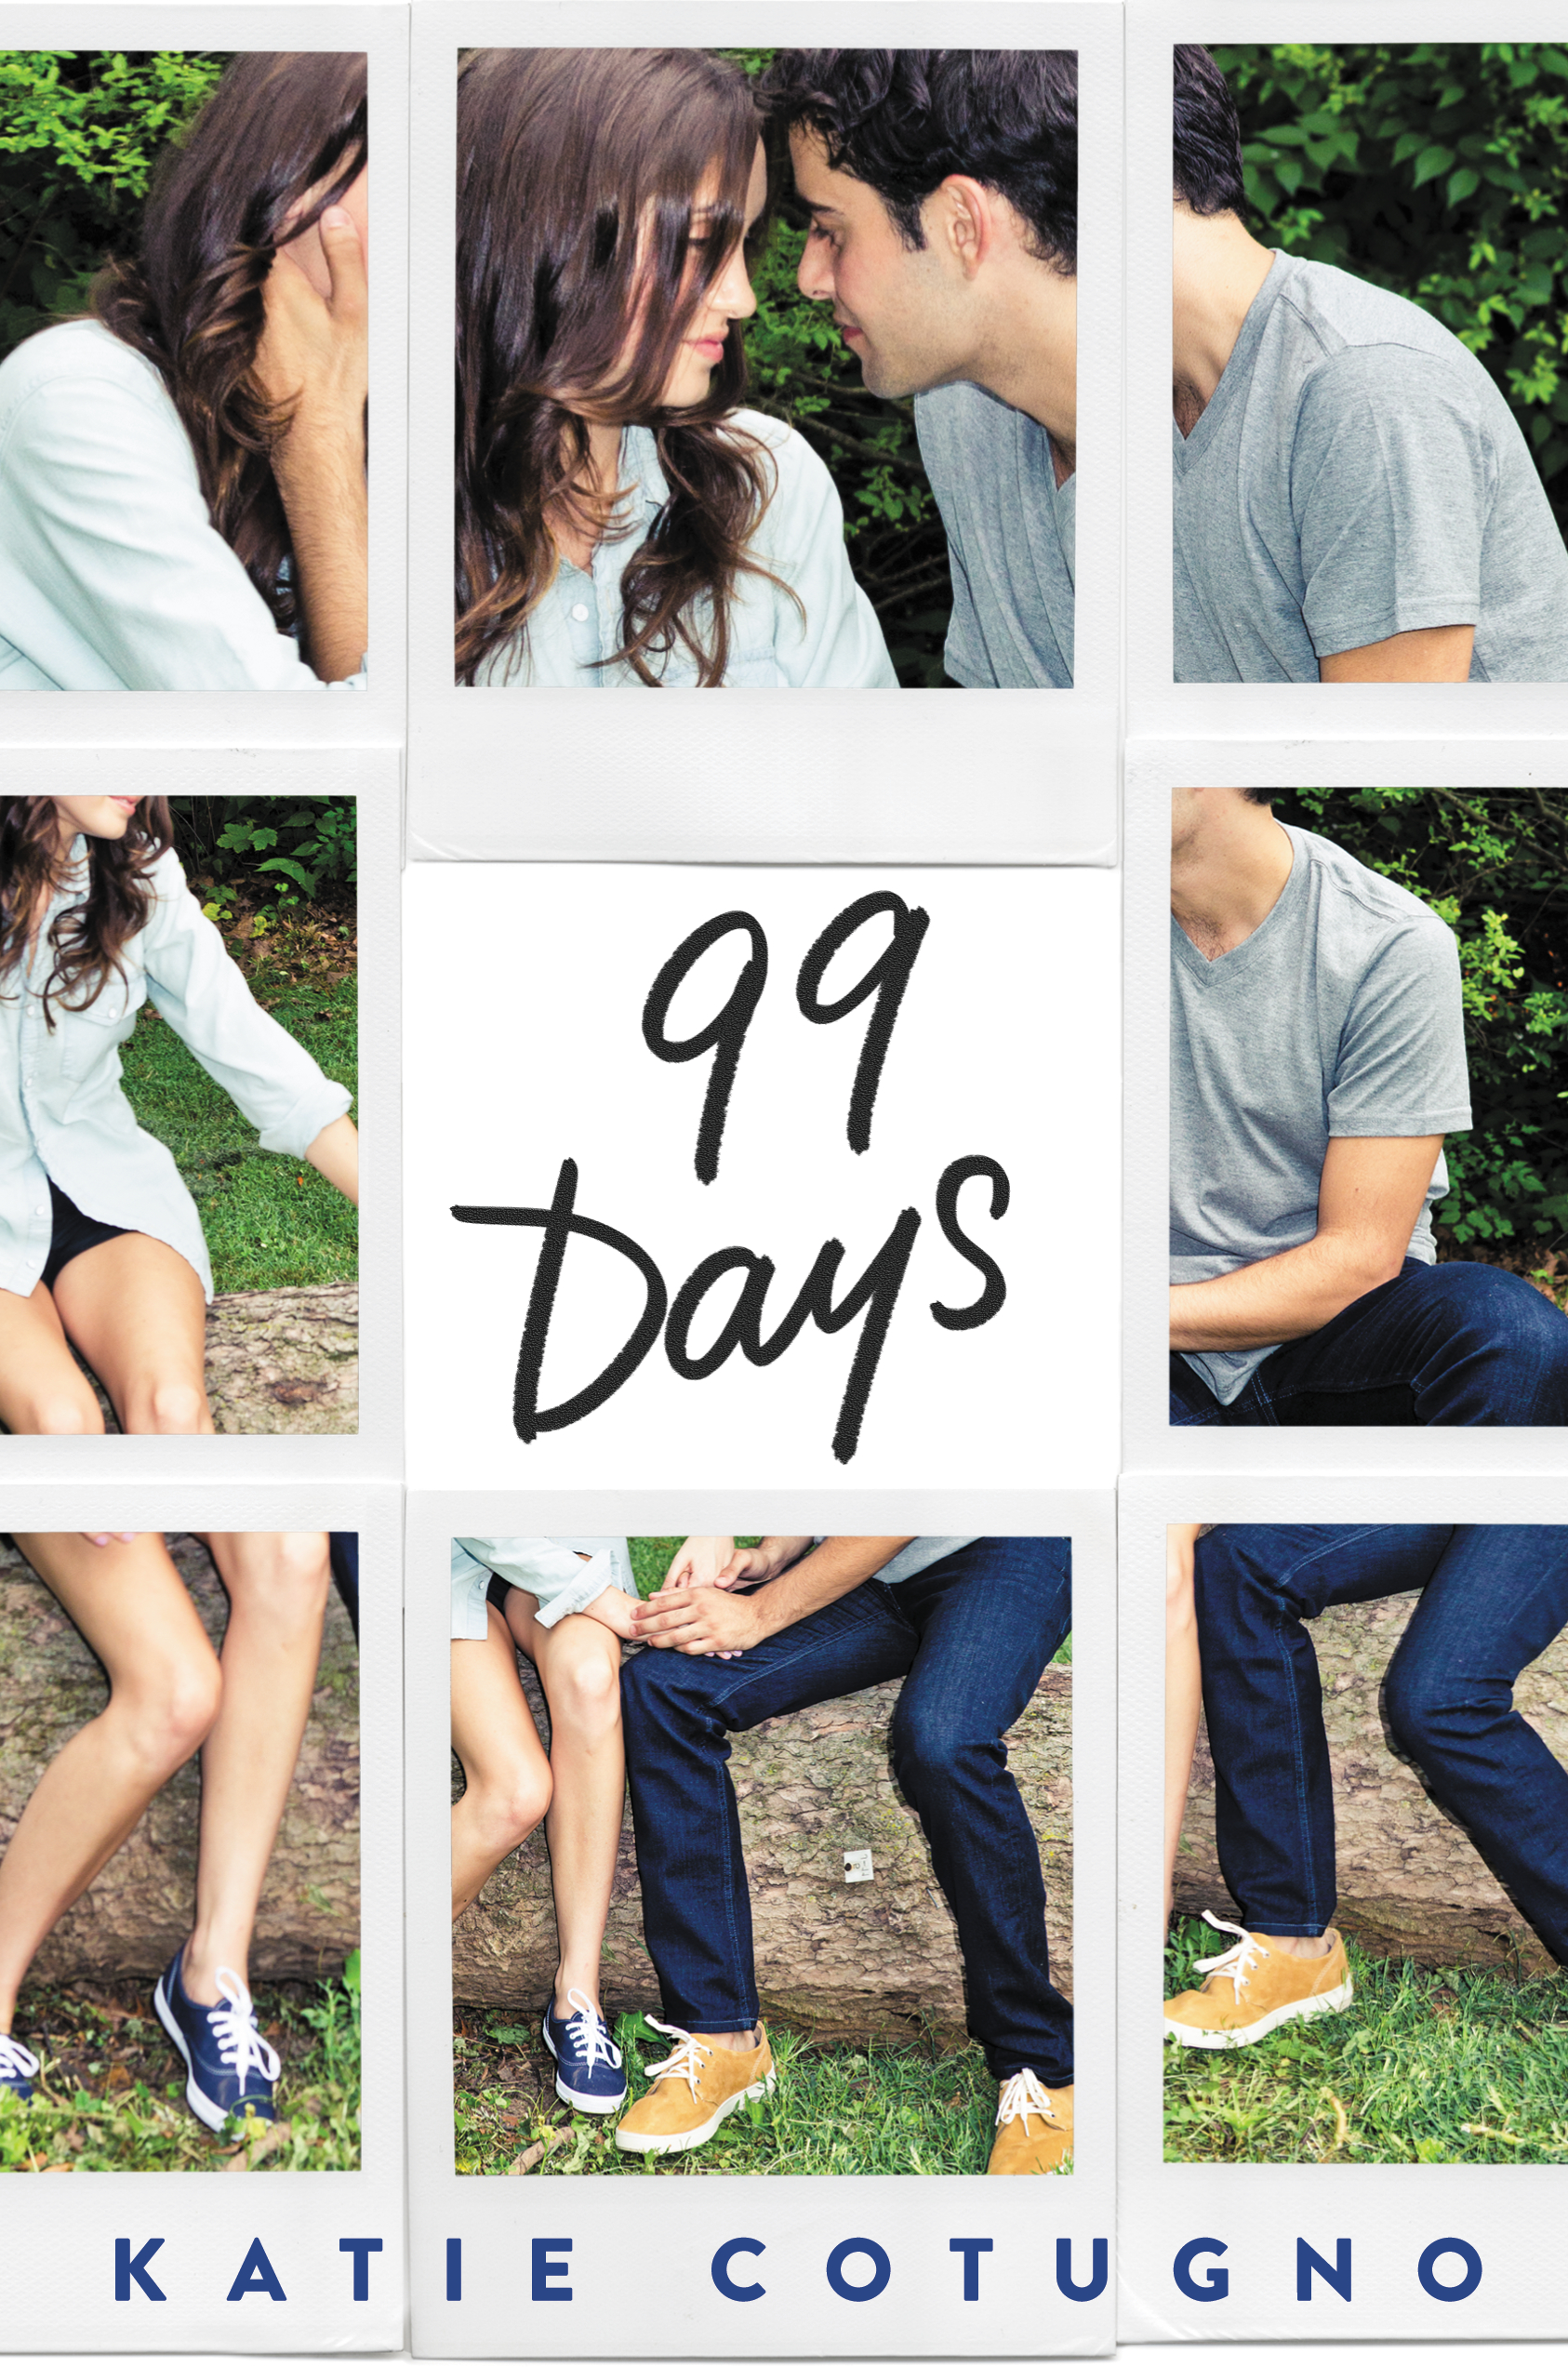 Cover of Katie Cotugno's young adult novel, 99 Days